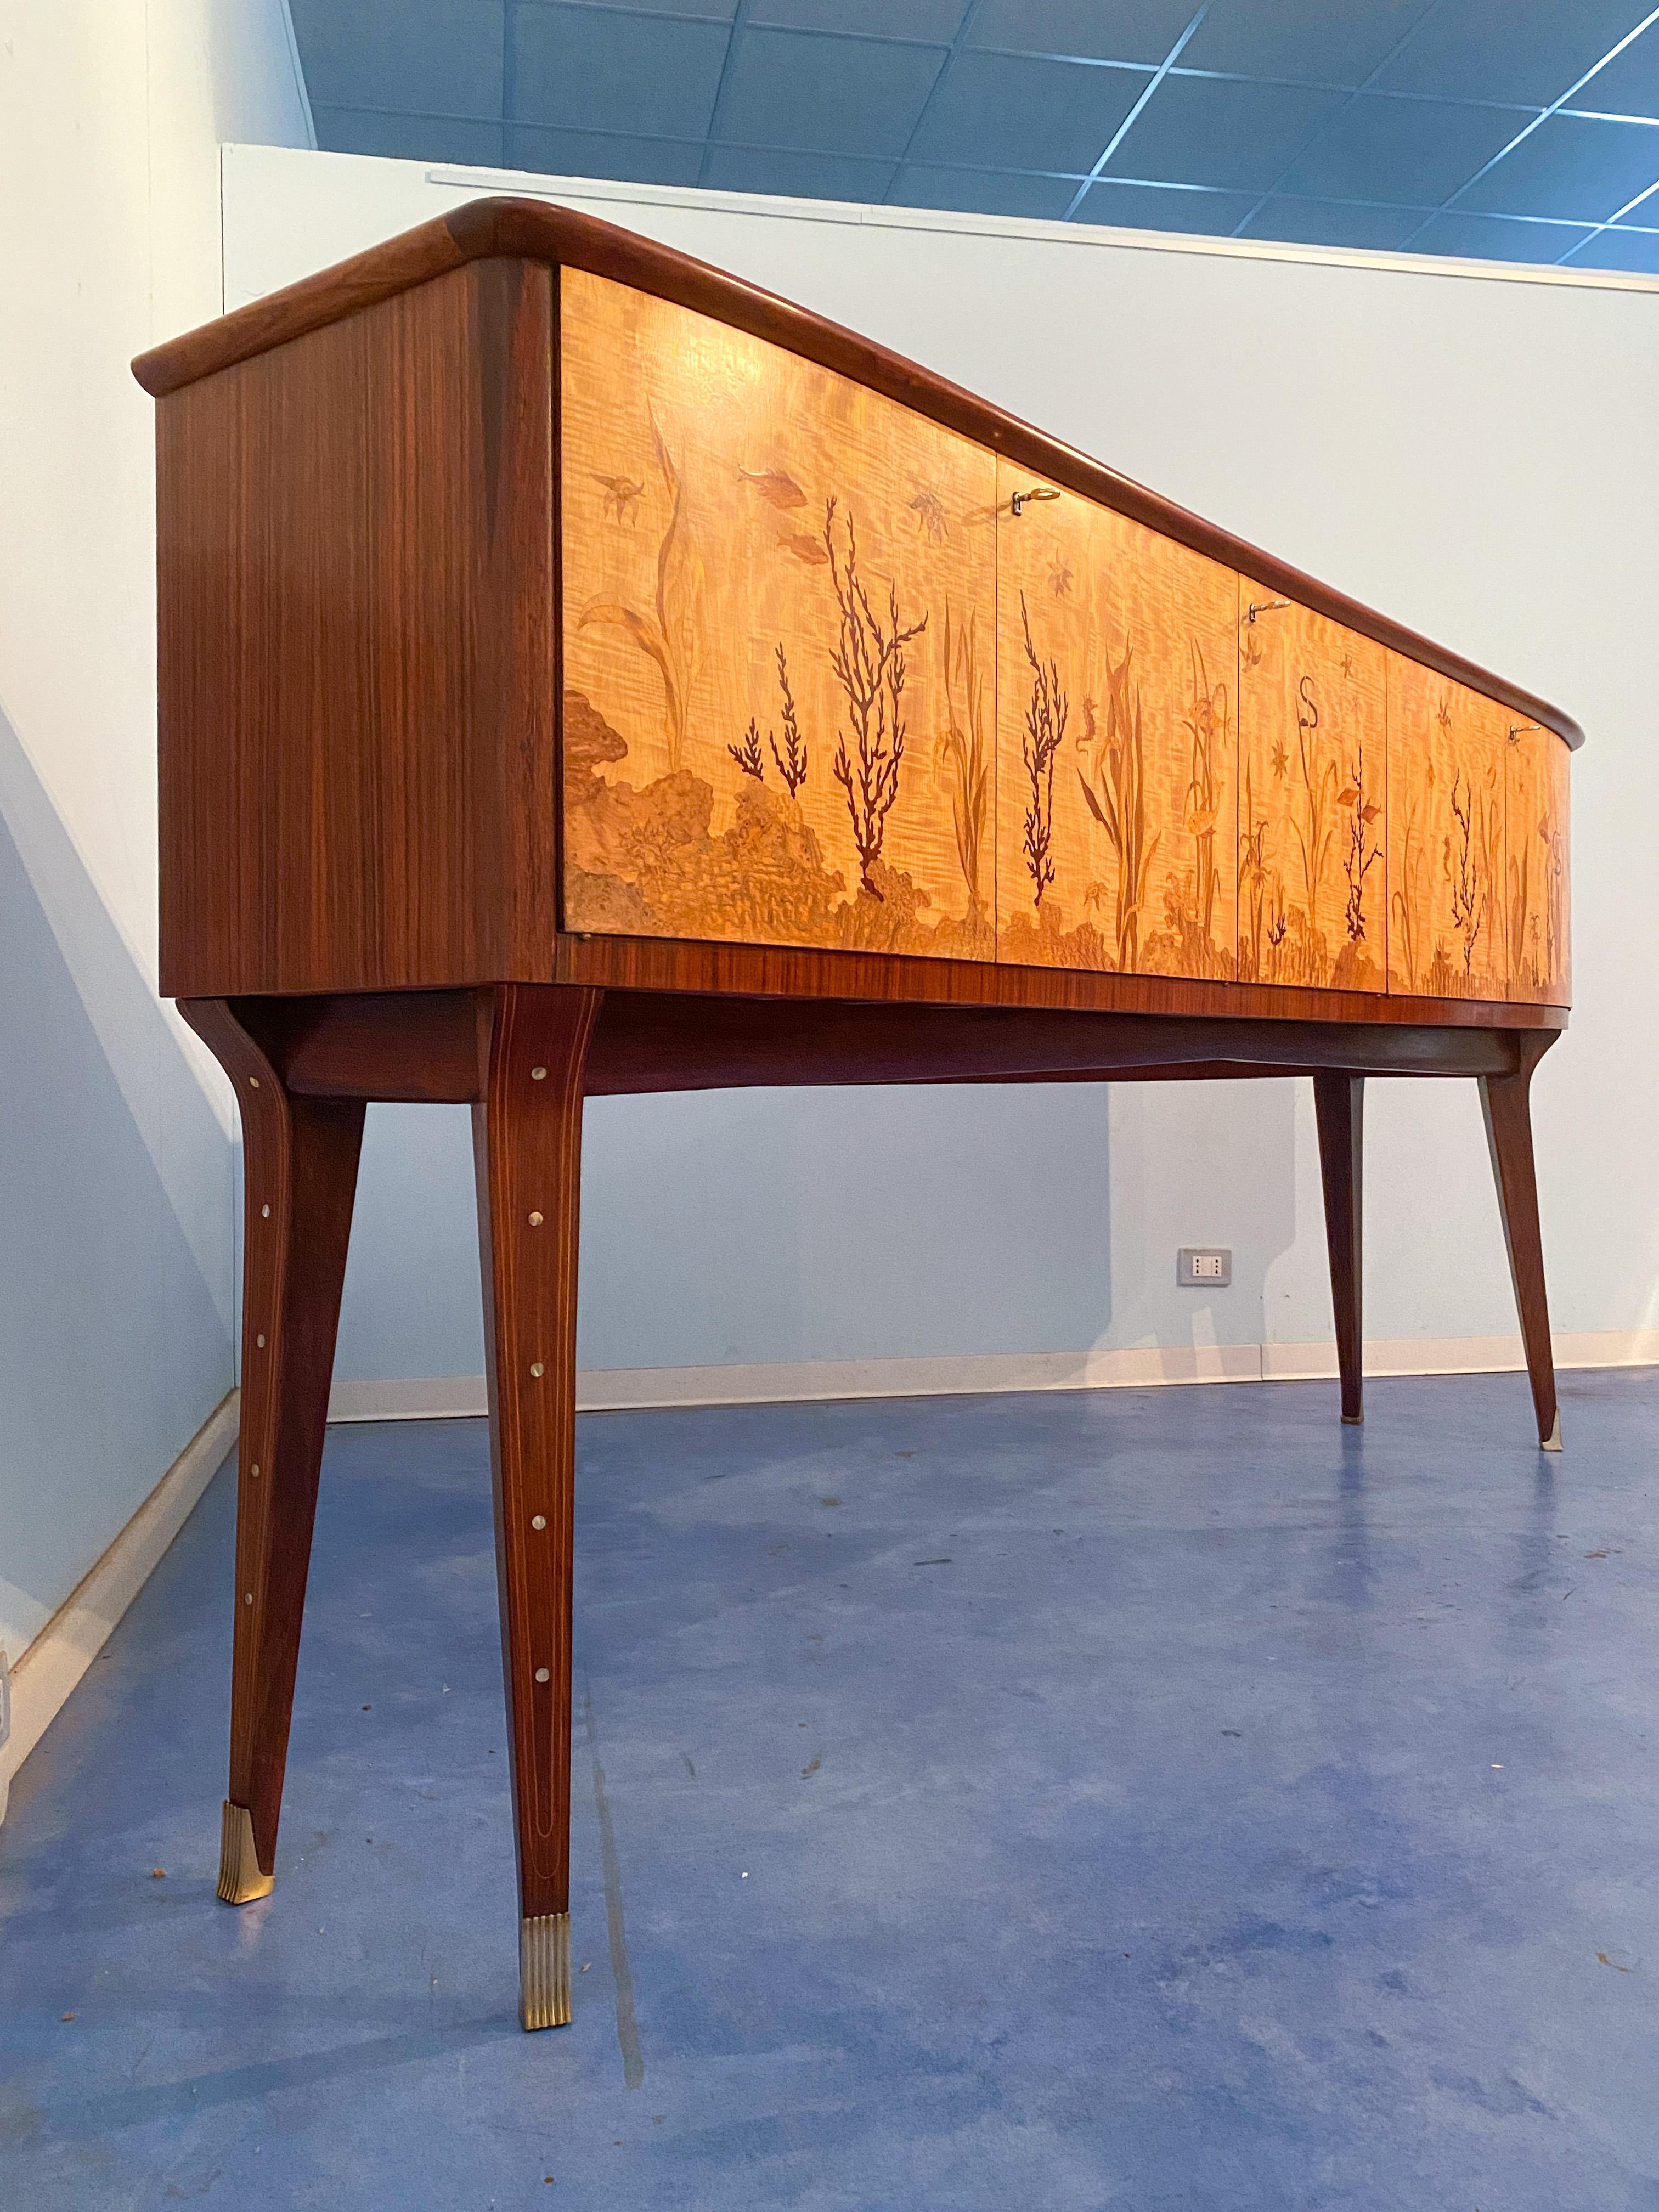 Inlay Italian Midcentury Inlaid Maple Sideboard by Andrea Gusmai, 1950s For Sale